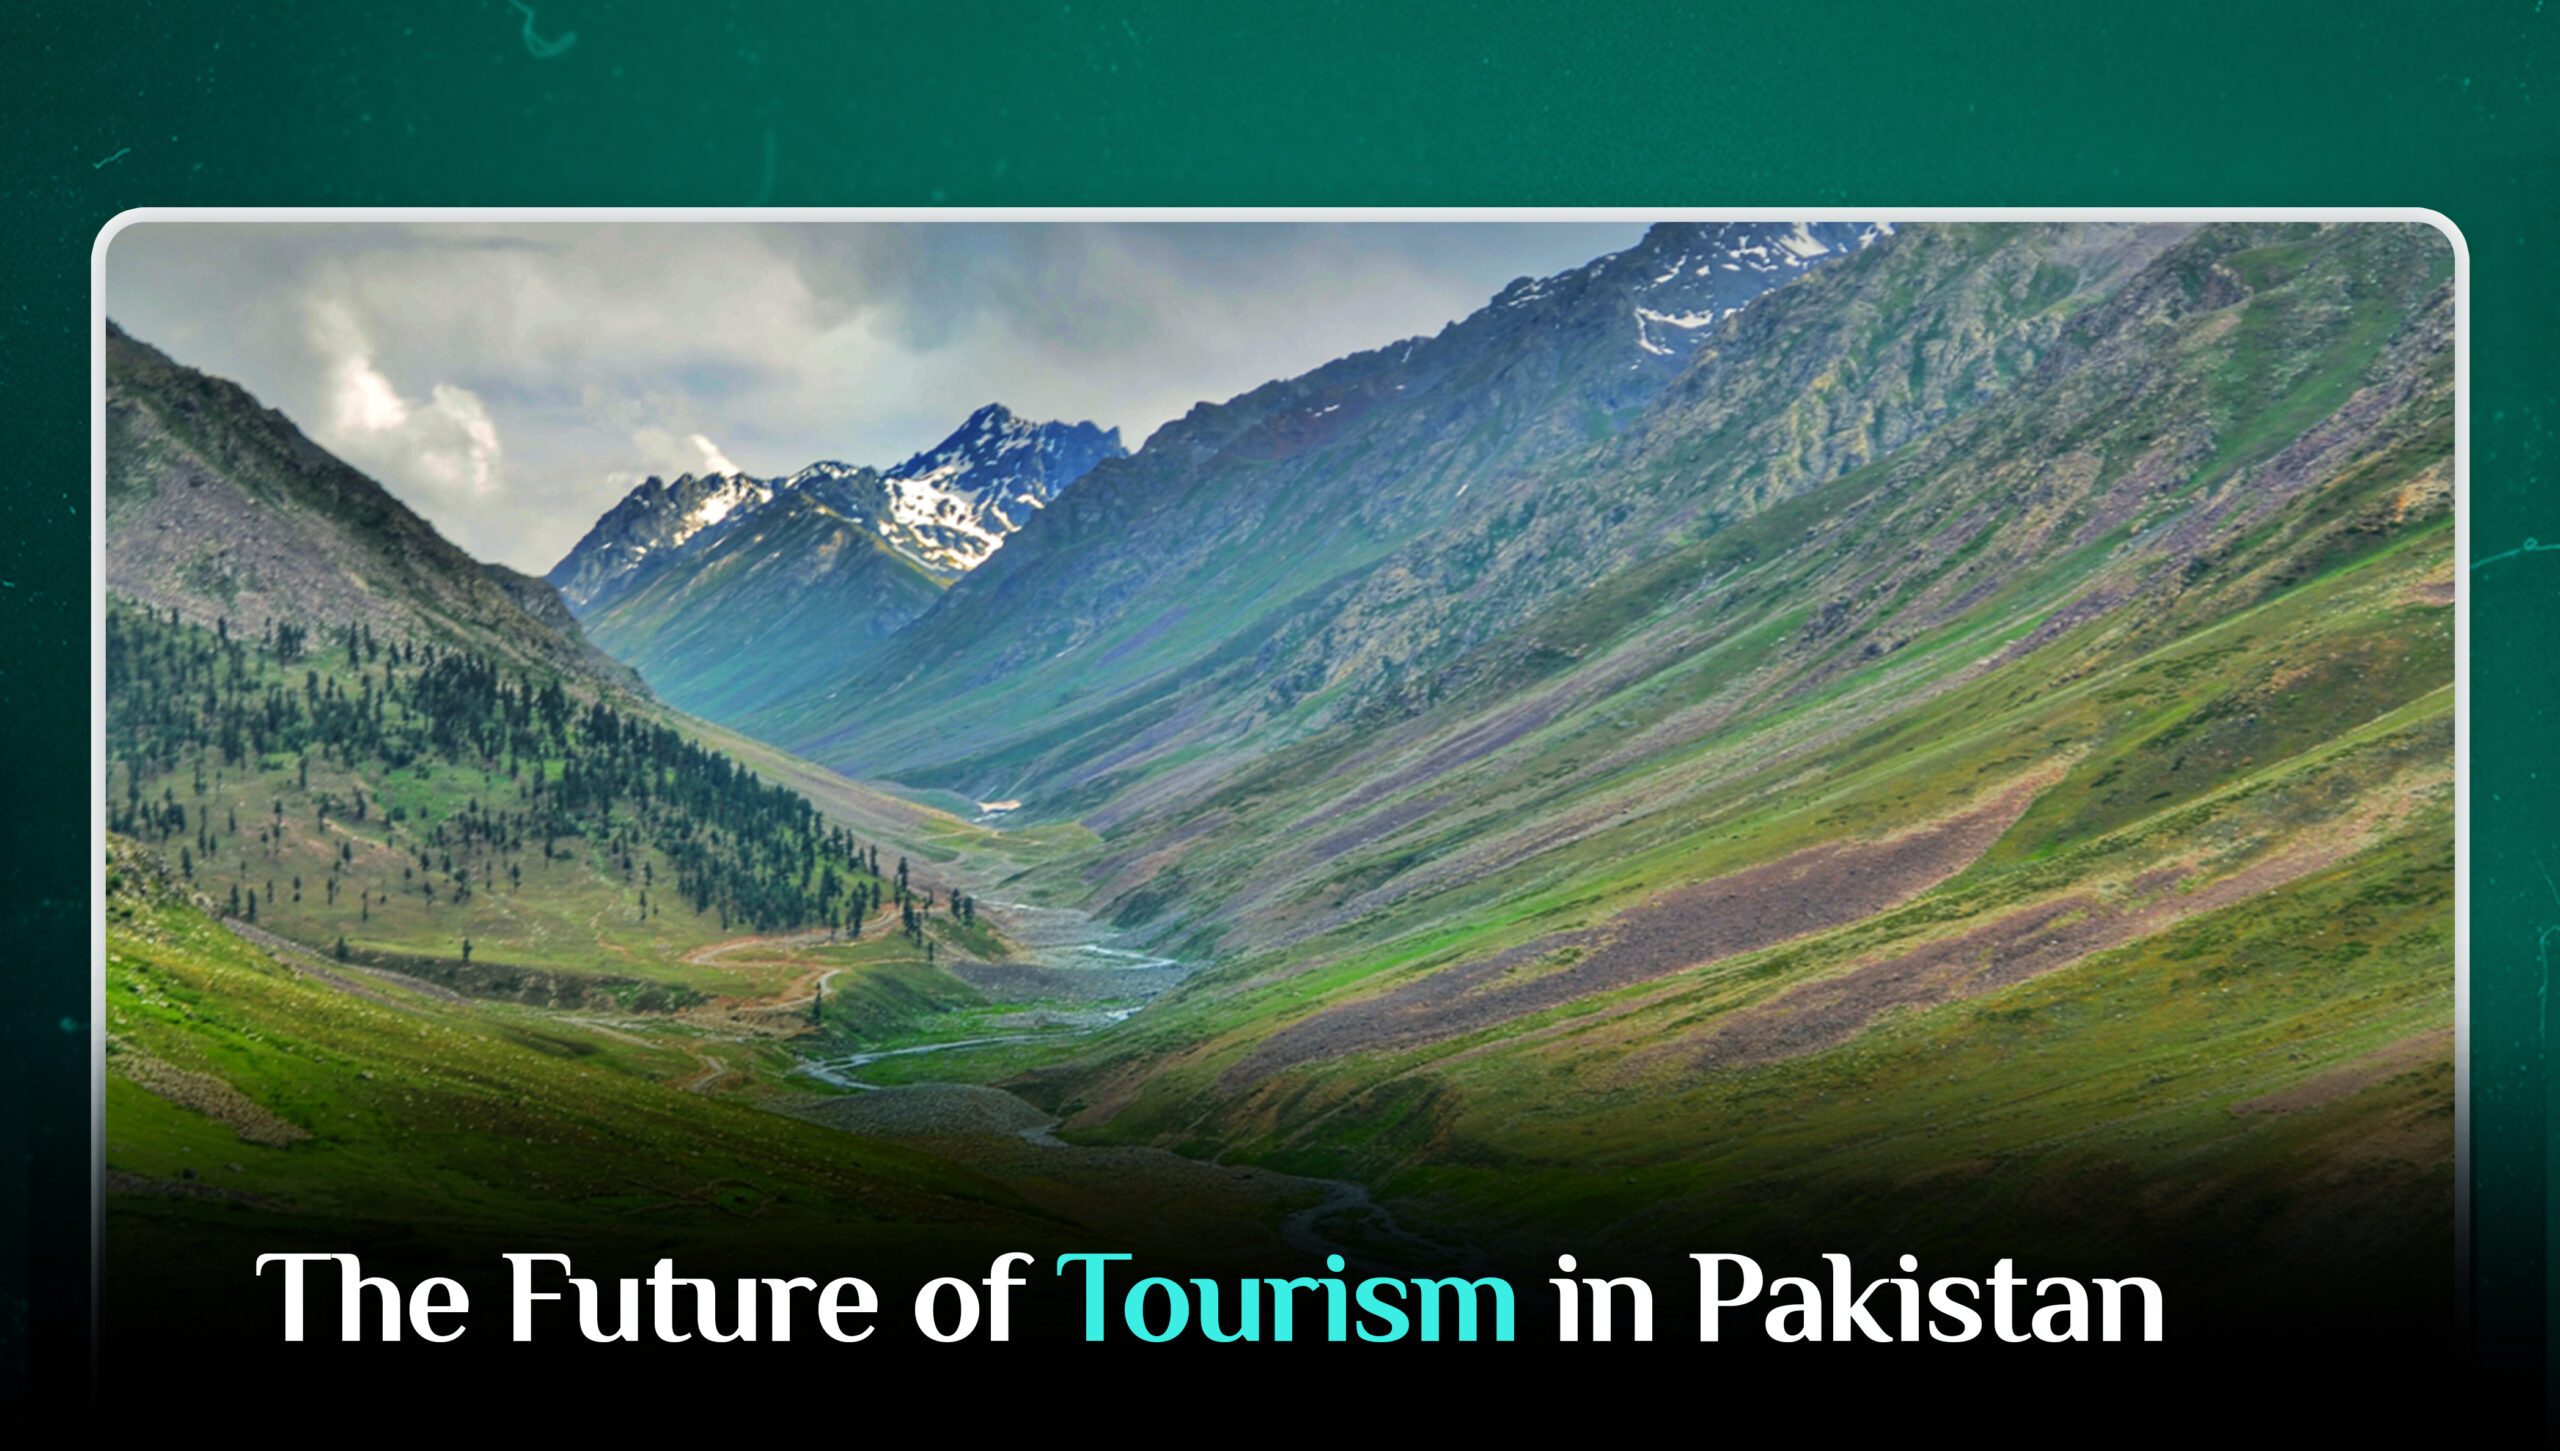 The Future of Tourism in Pakistan